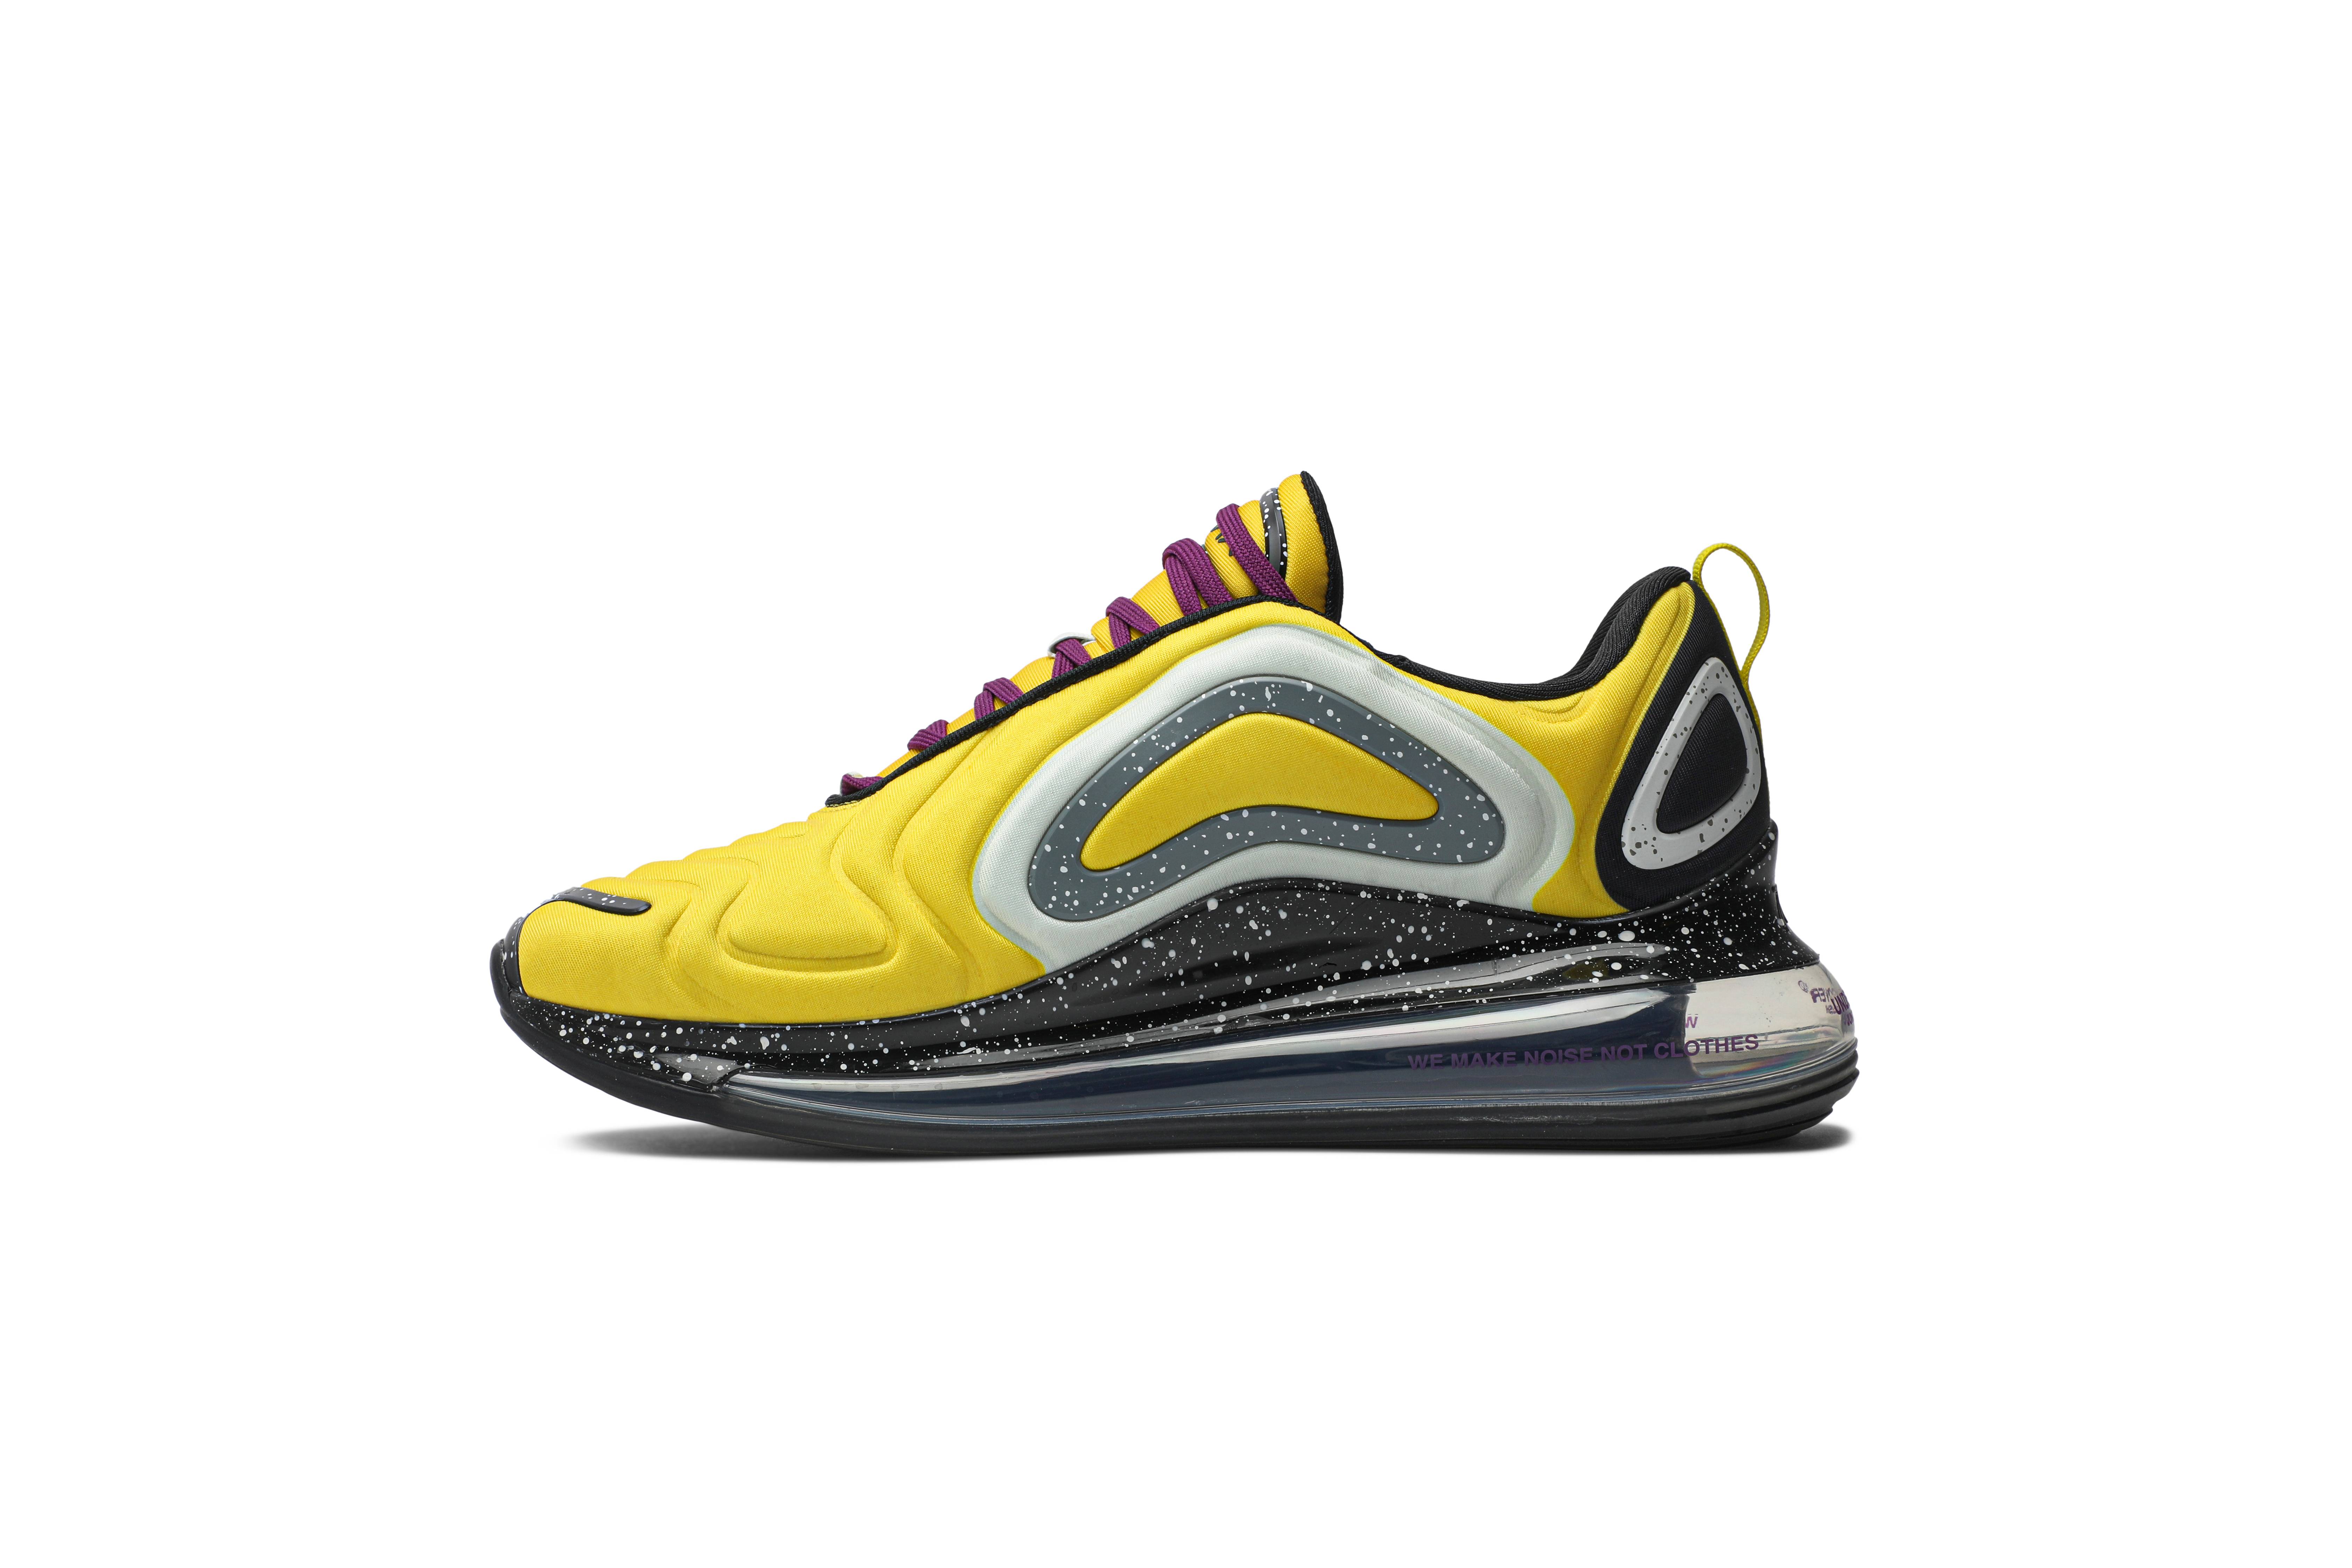 nike x undercover air max 720 yellow